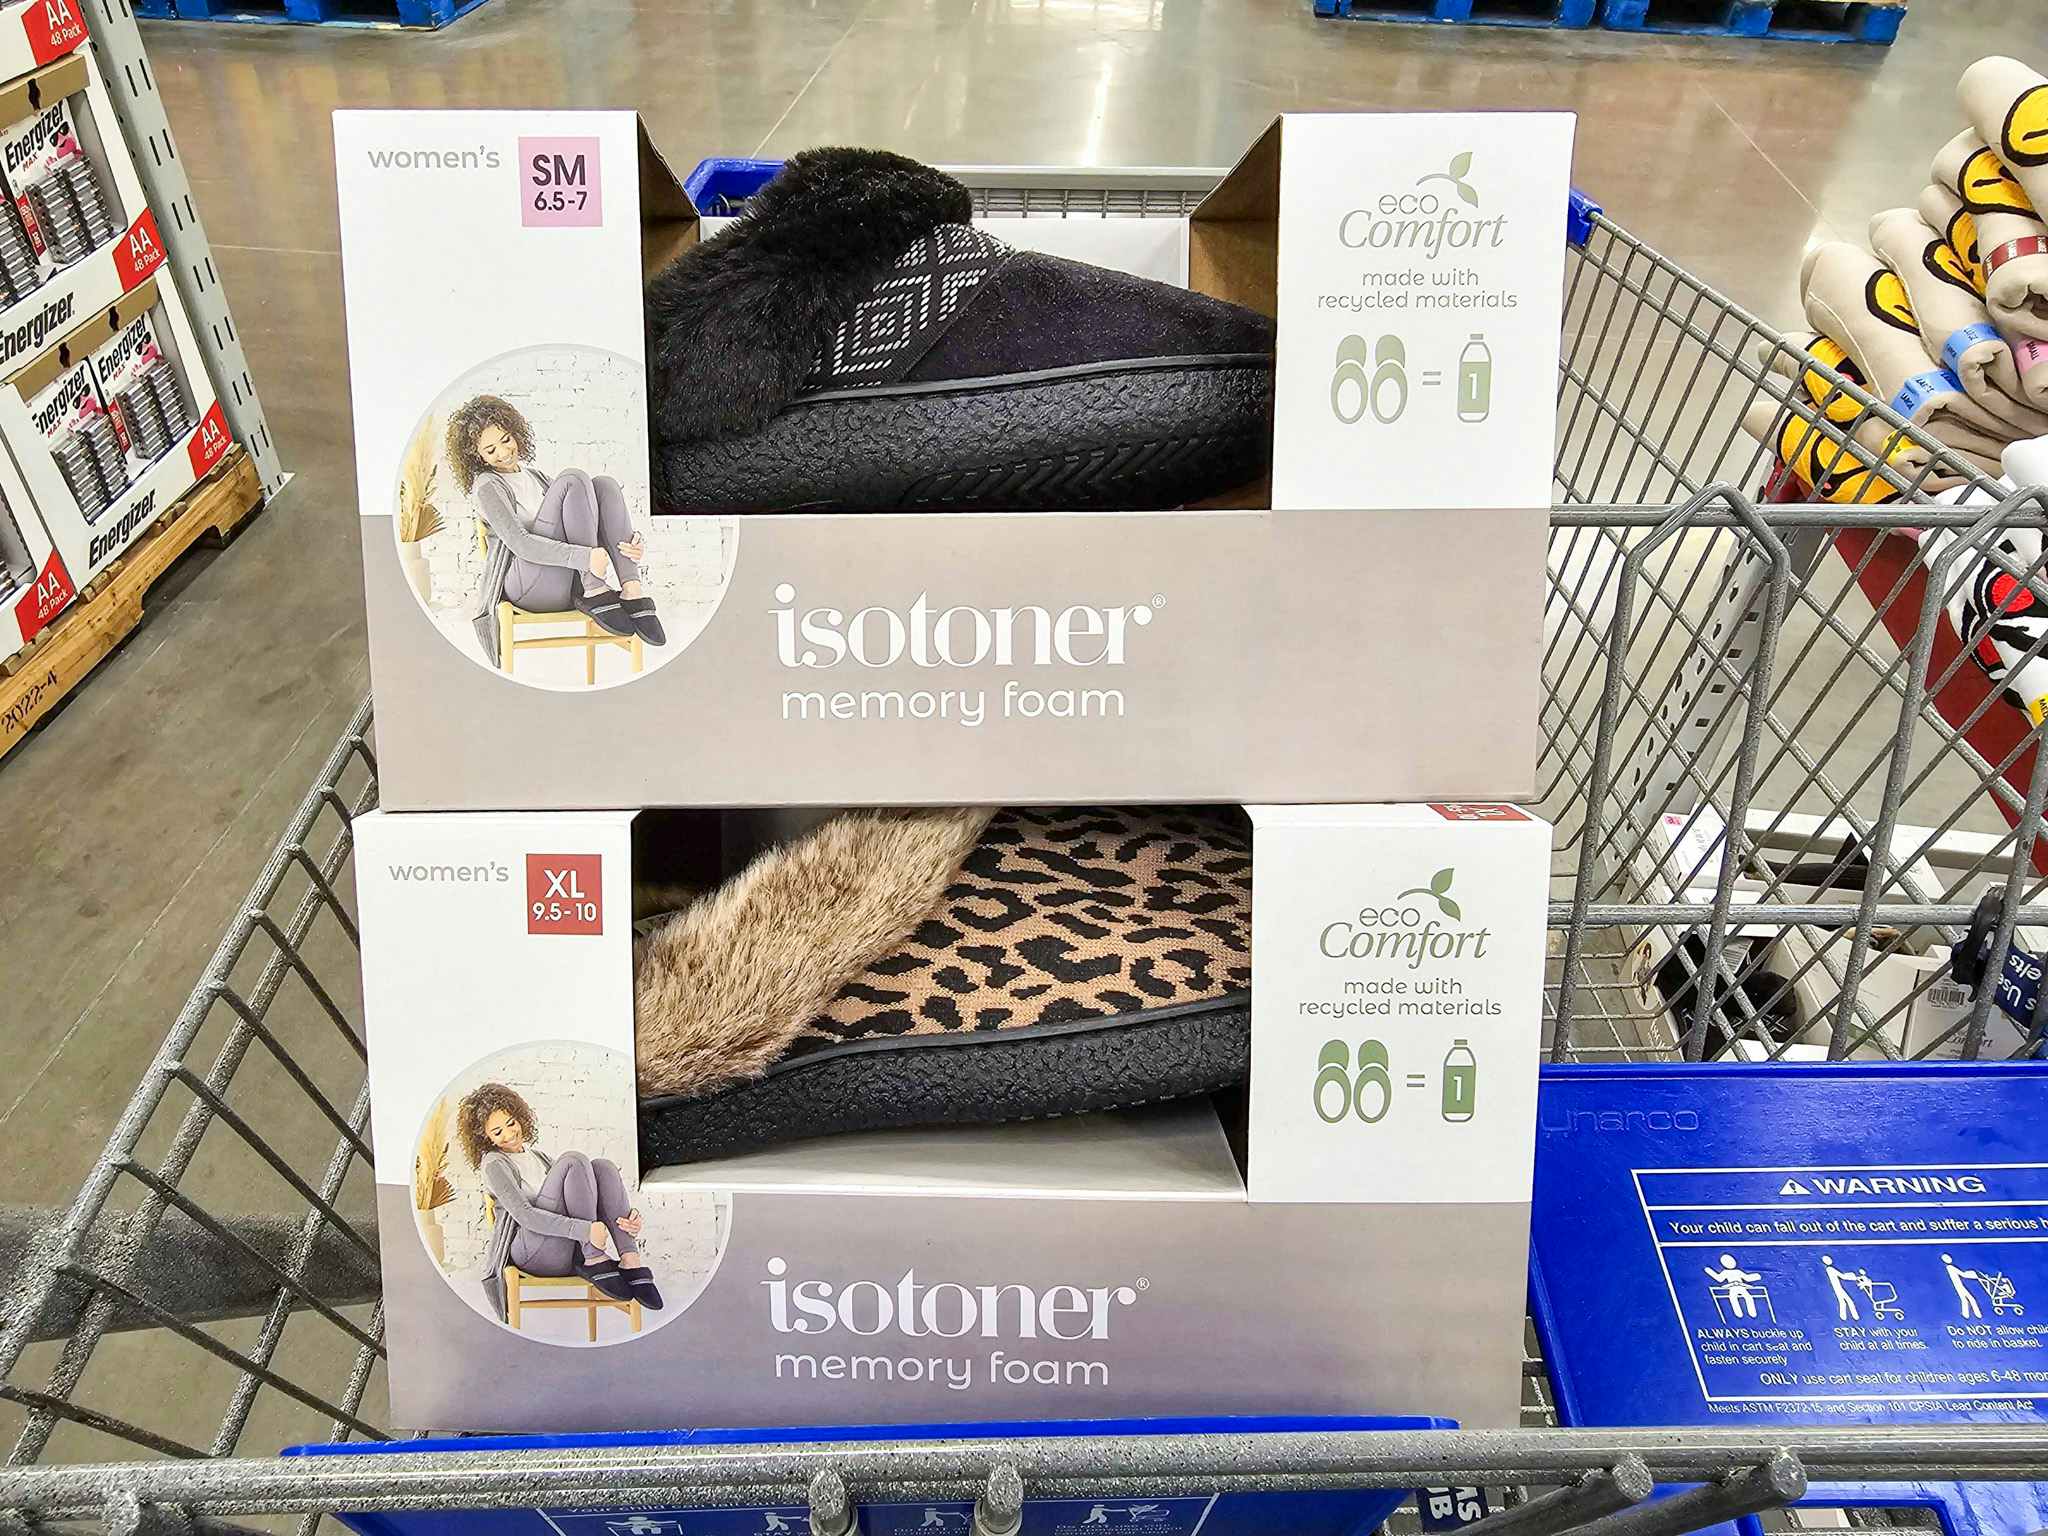 2 pairs of slippers in a cart